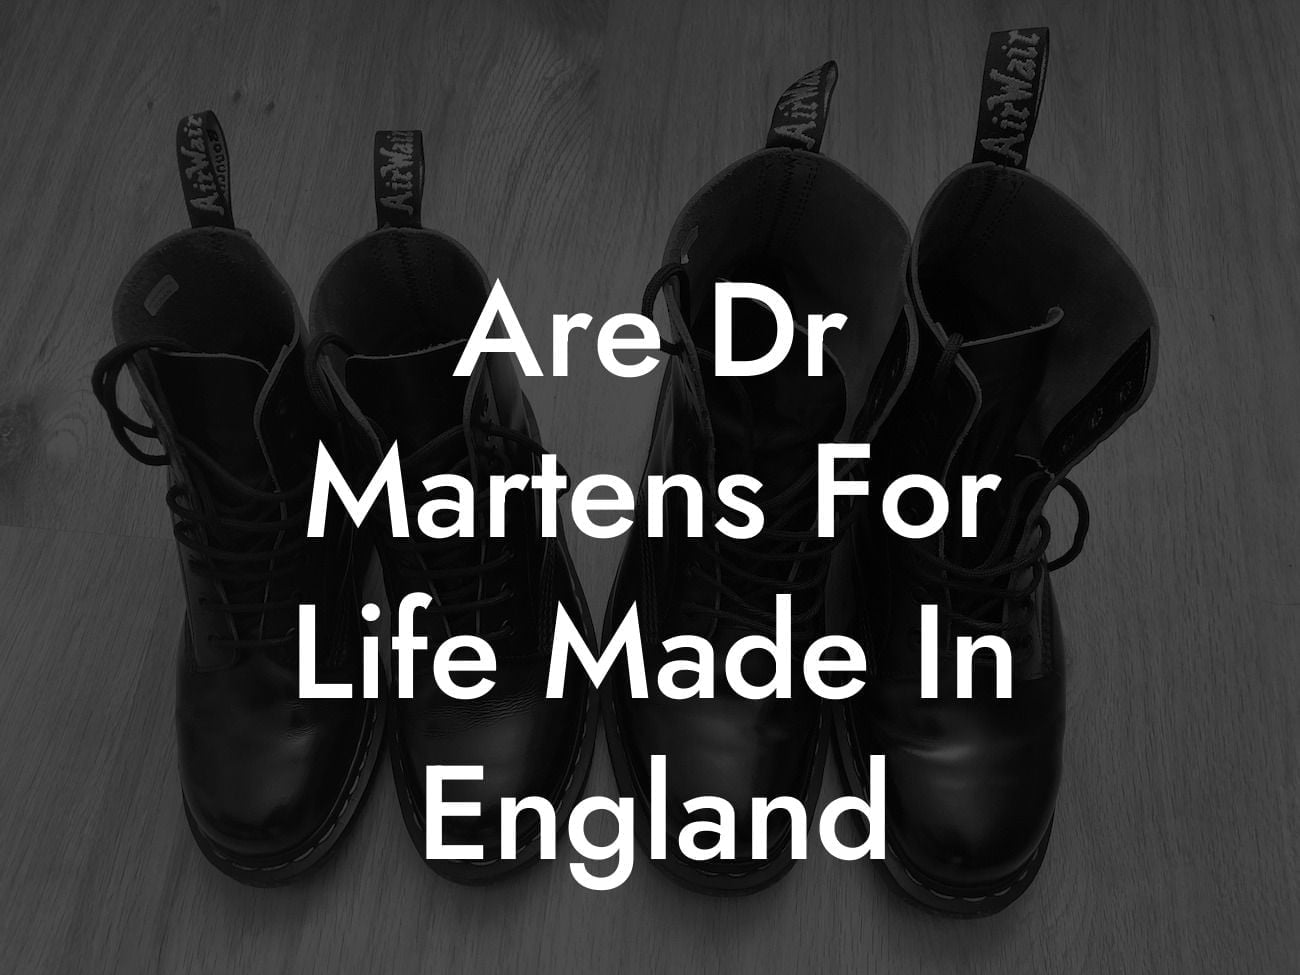 Are Dr Martens For Life Made In England